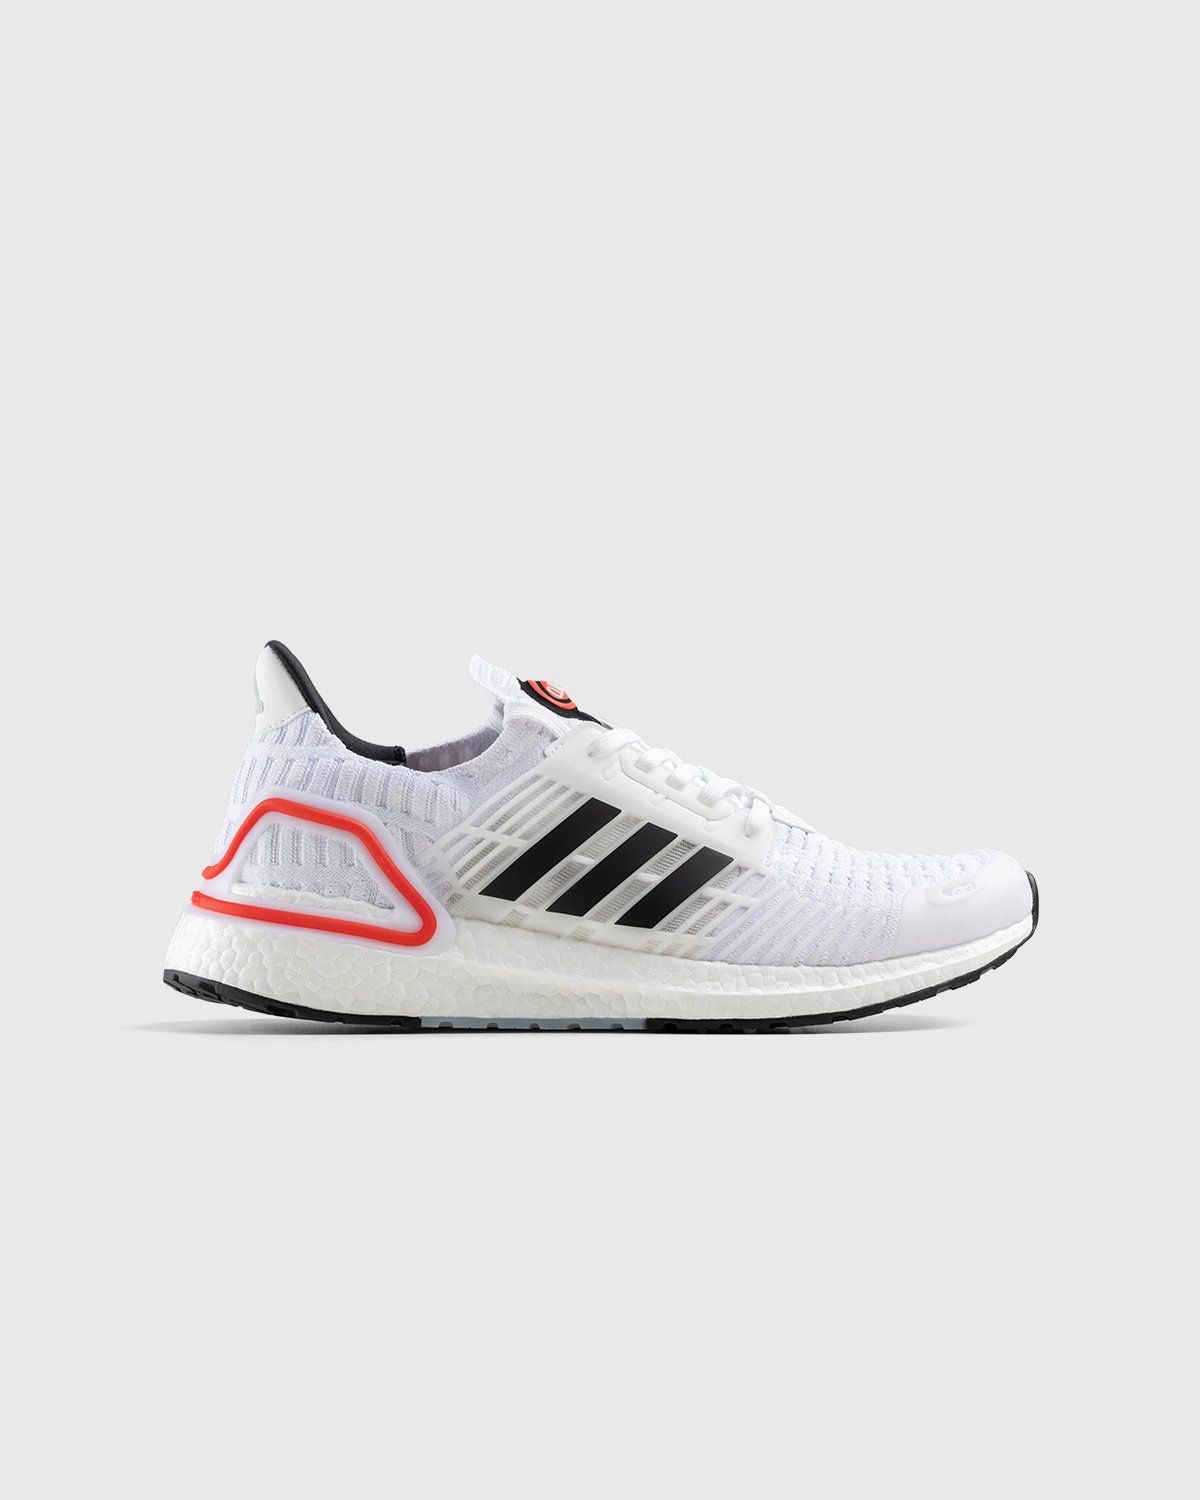 Adidas – Ultraboost Climacool 1 DNA White/Black/Red - Low Top Sneakers - White - Image 1